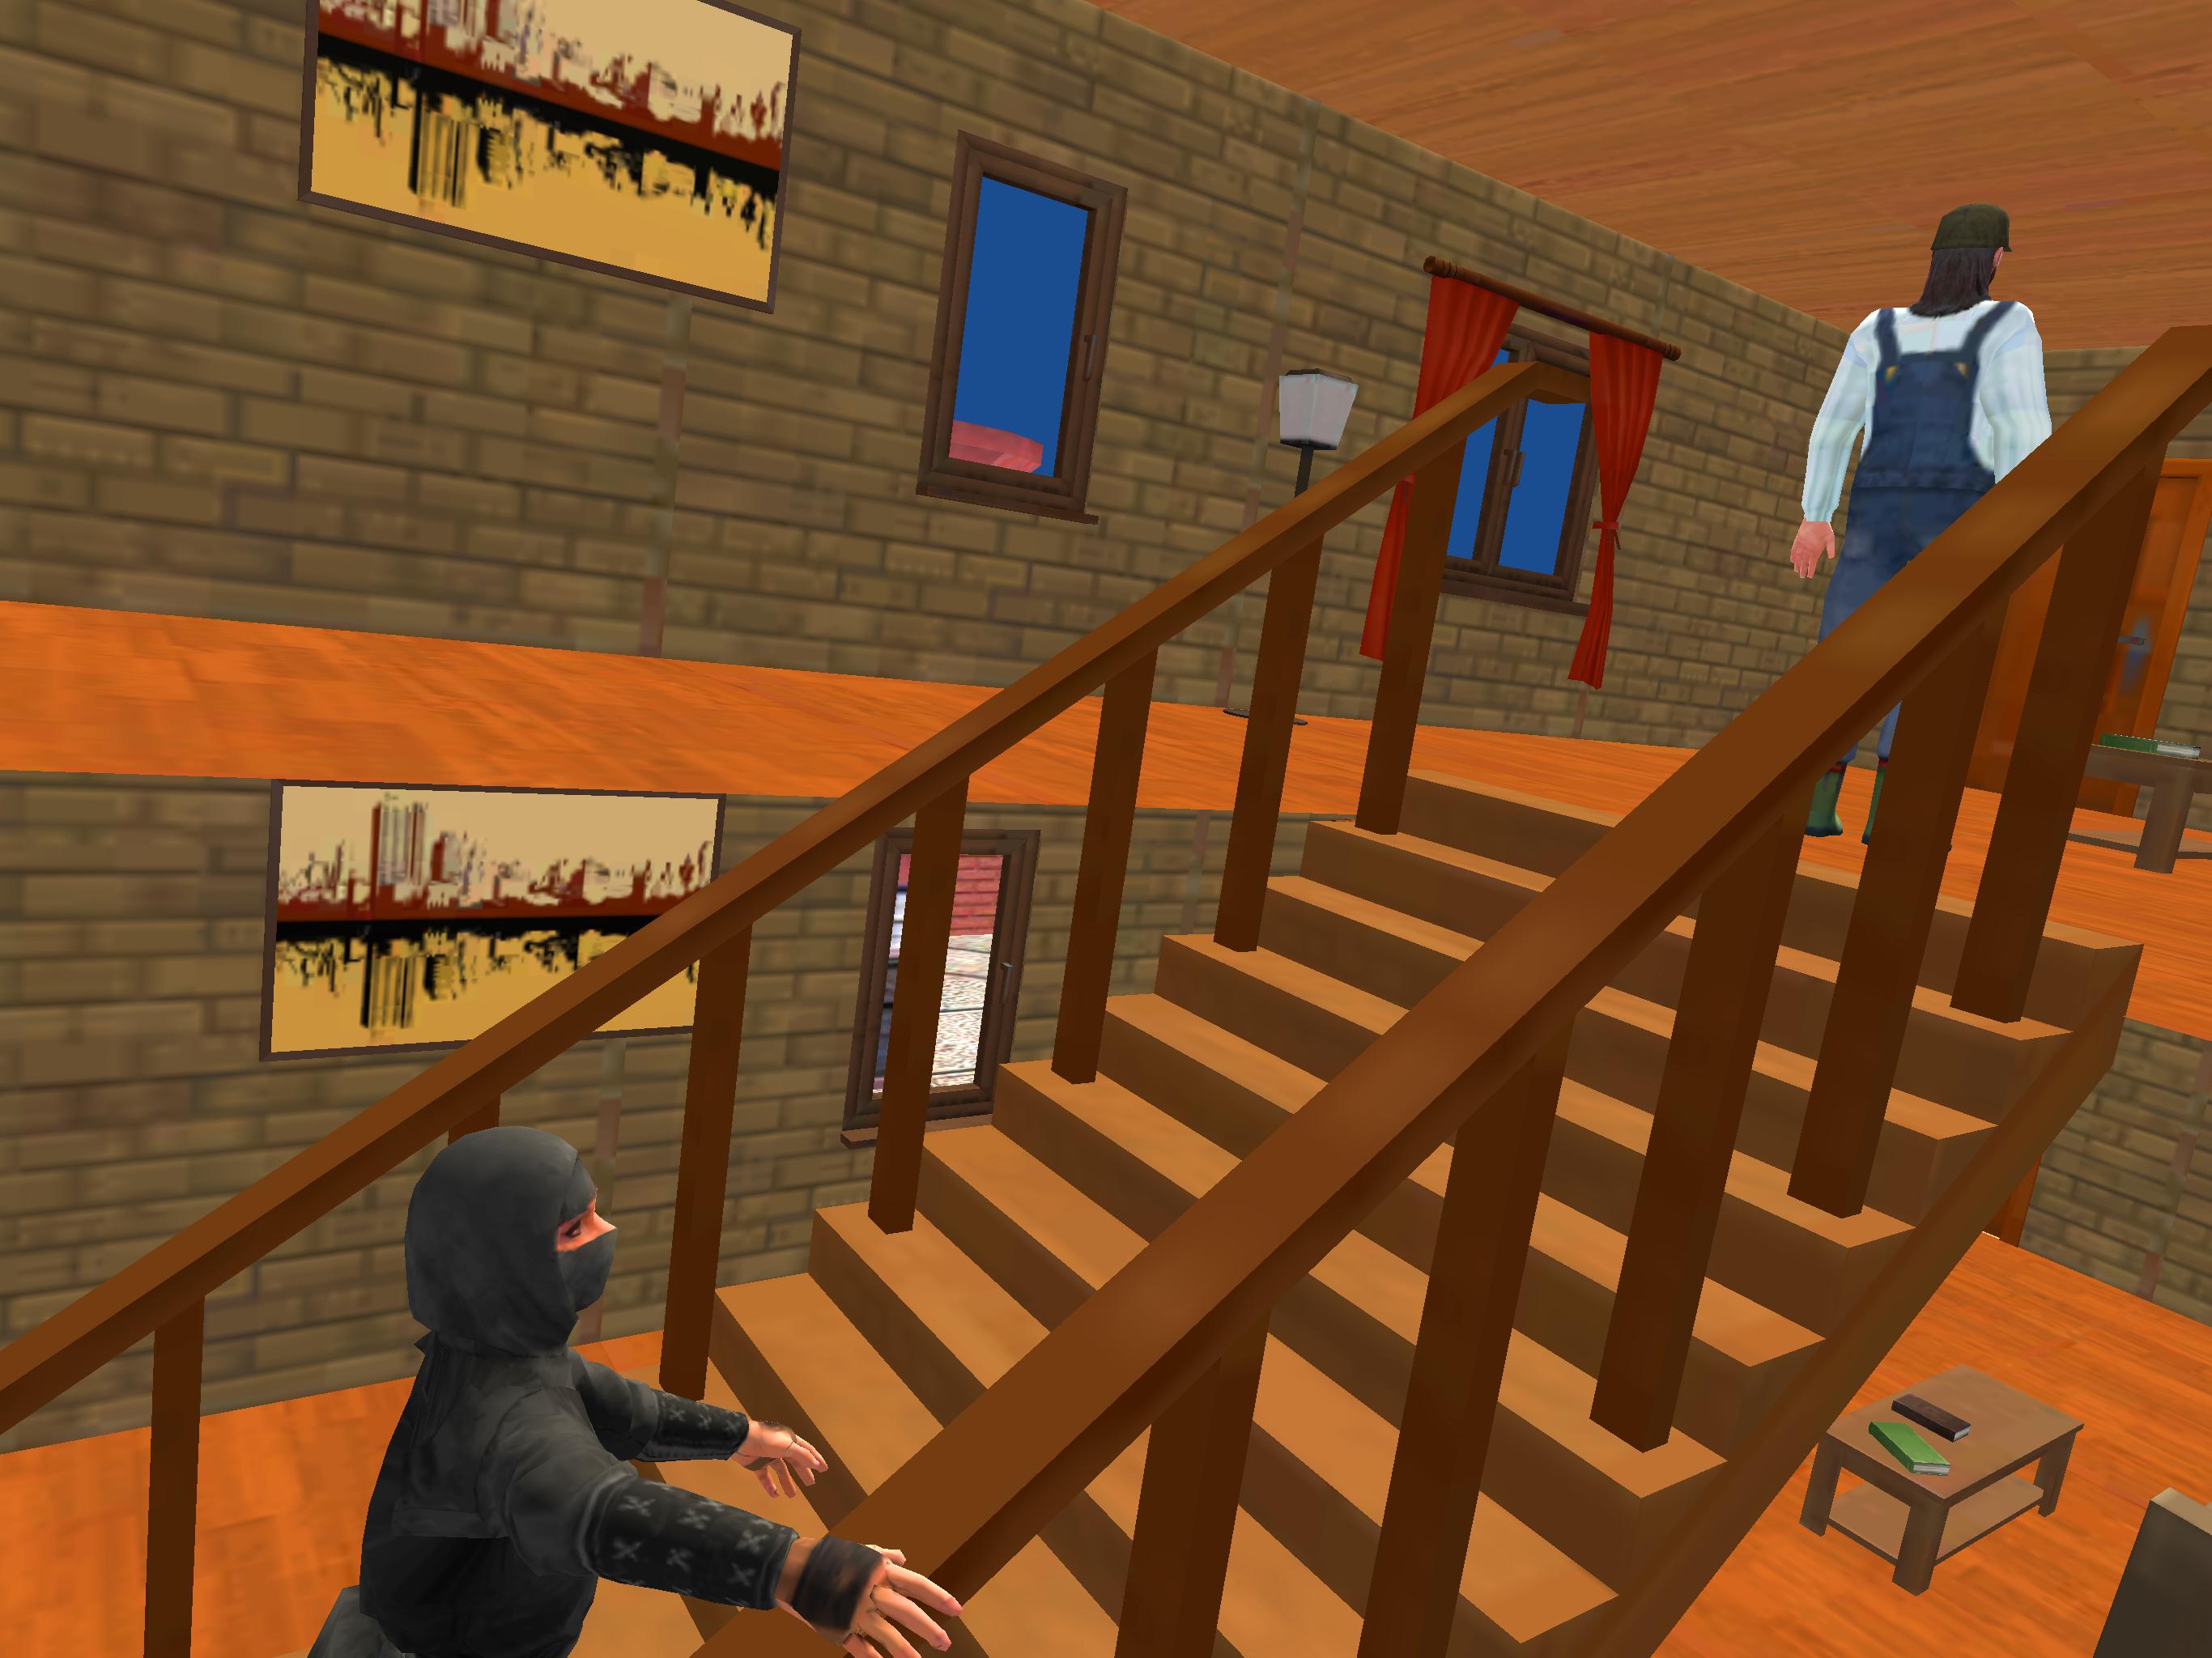 Crime City Thief Robbery Sneak Simulator For Android Apk Download - thief doge roblox